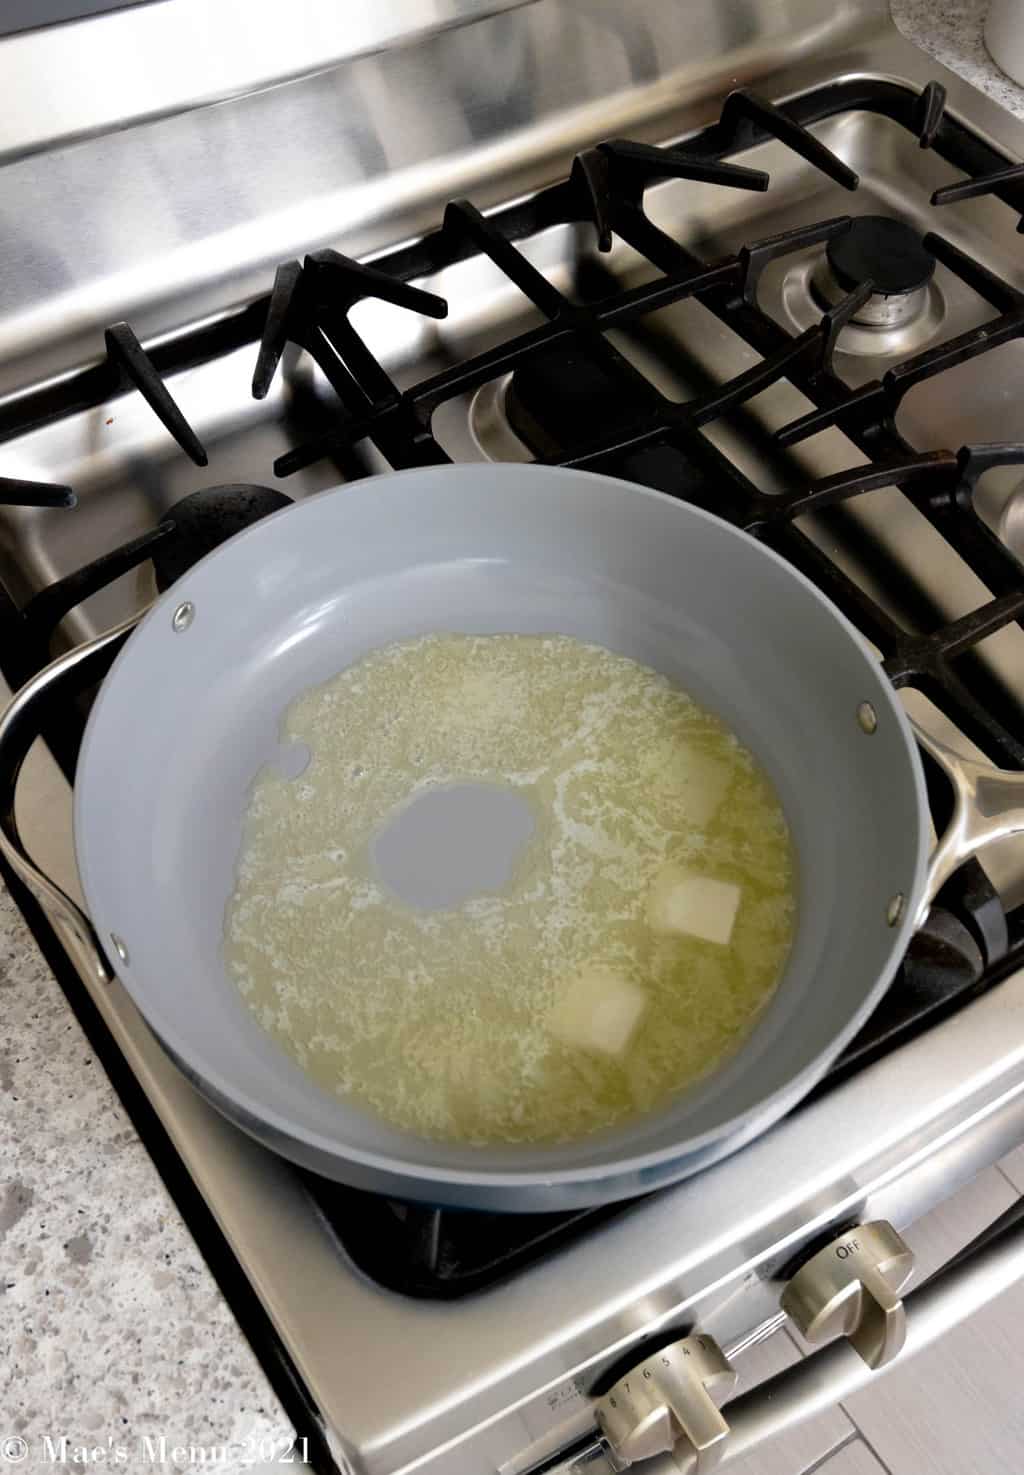 Melting butter in a pan on the gas range